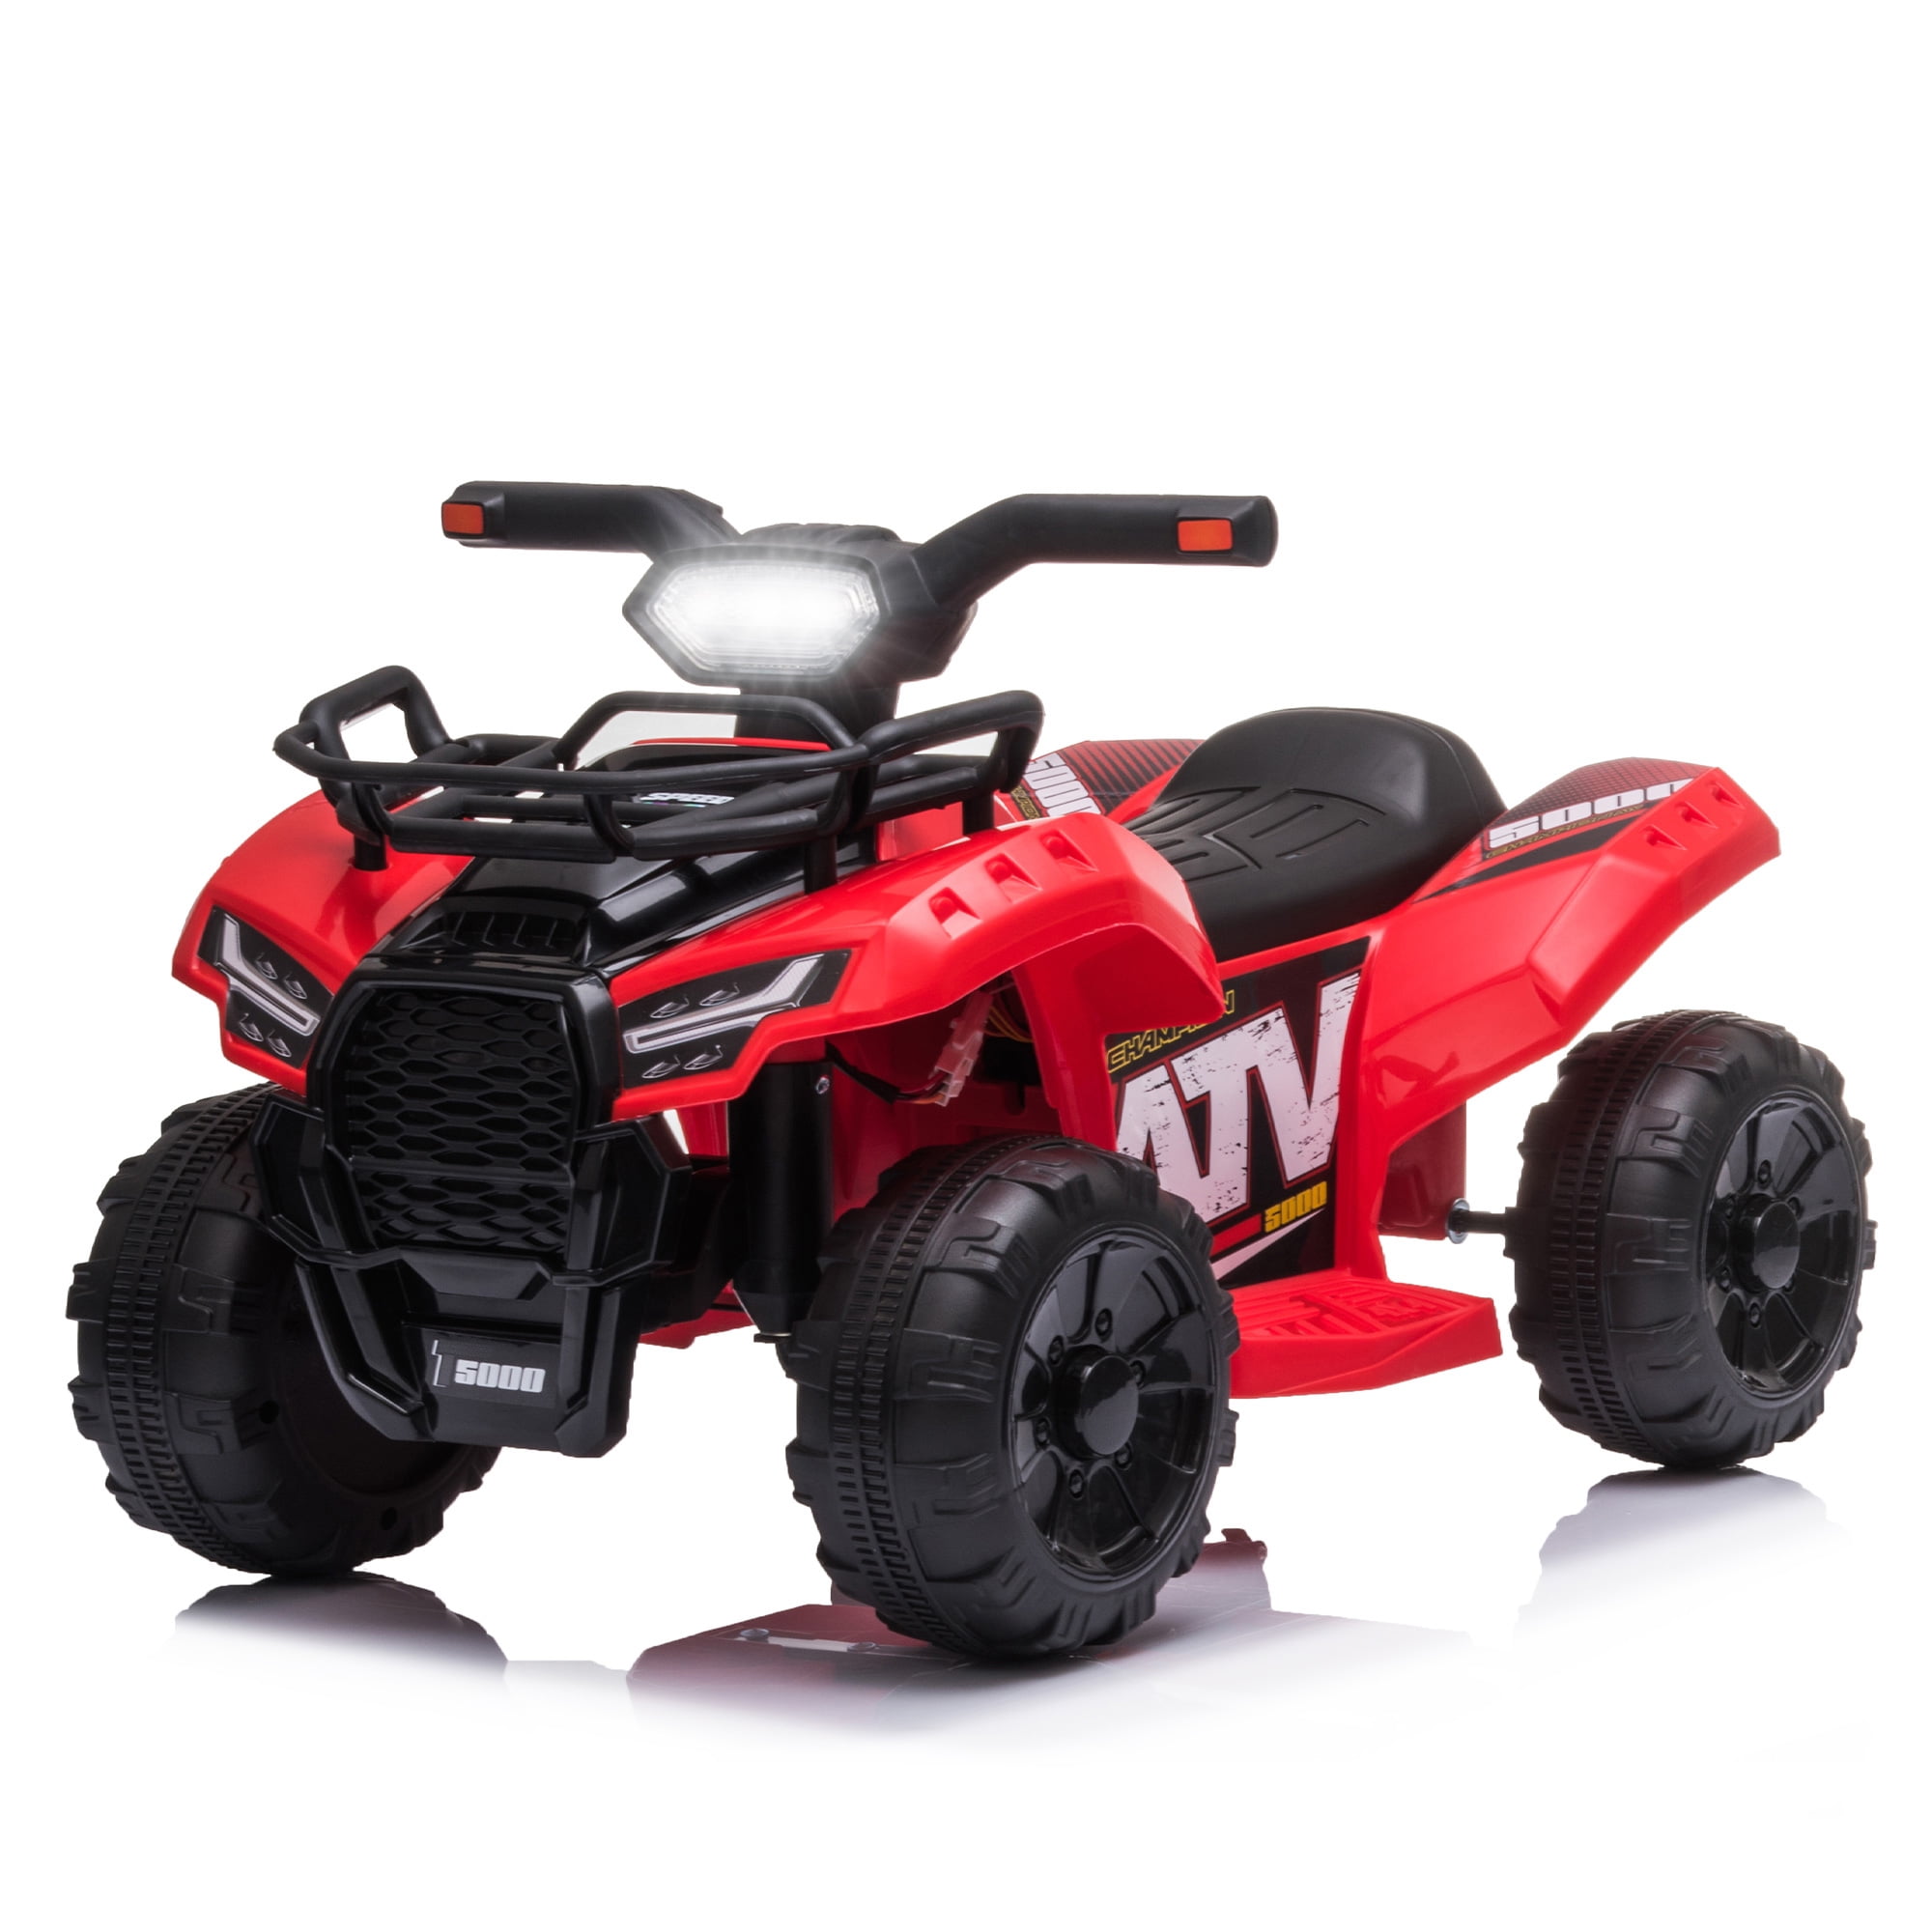 Details about   Ride On Kids 6V Quad Car Battery Powered Toy for Boys and Girls Red New 